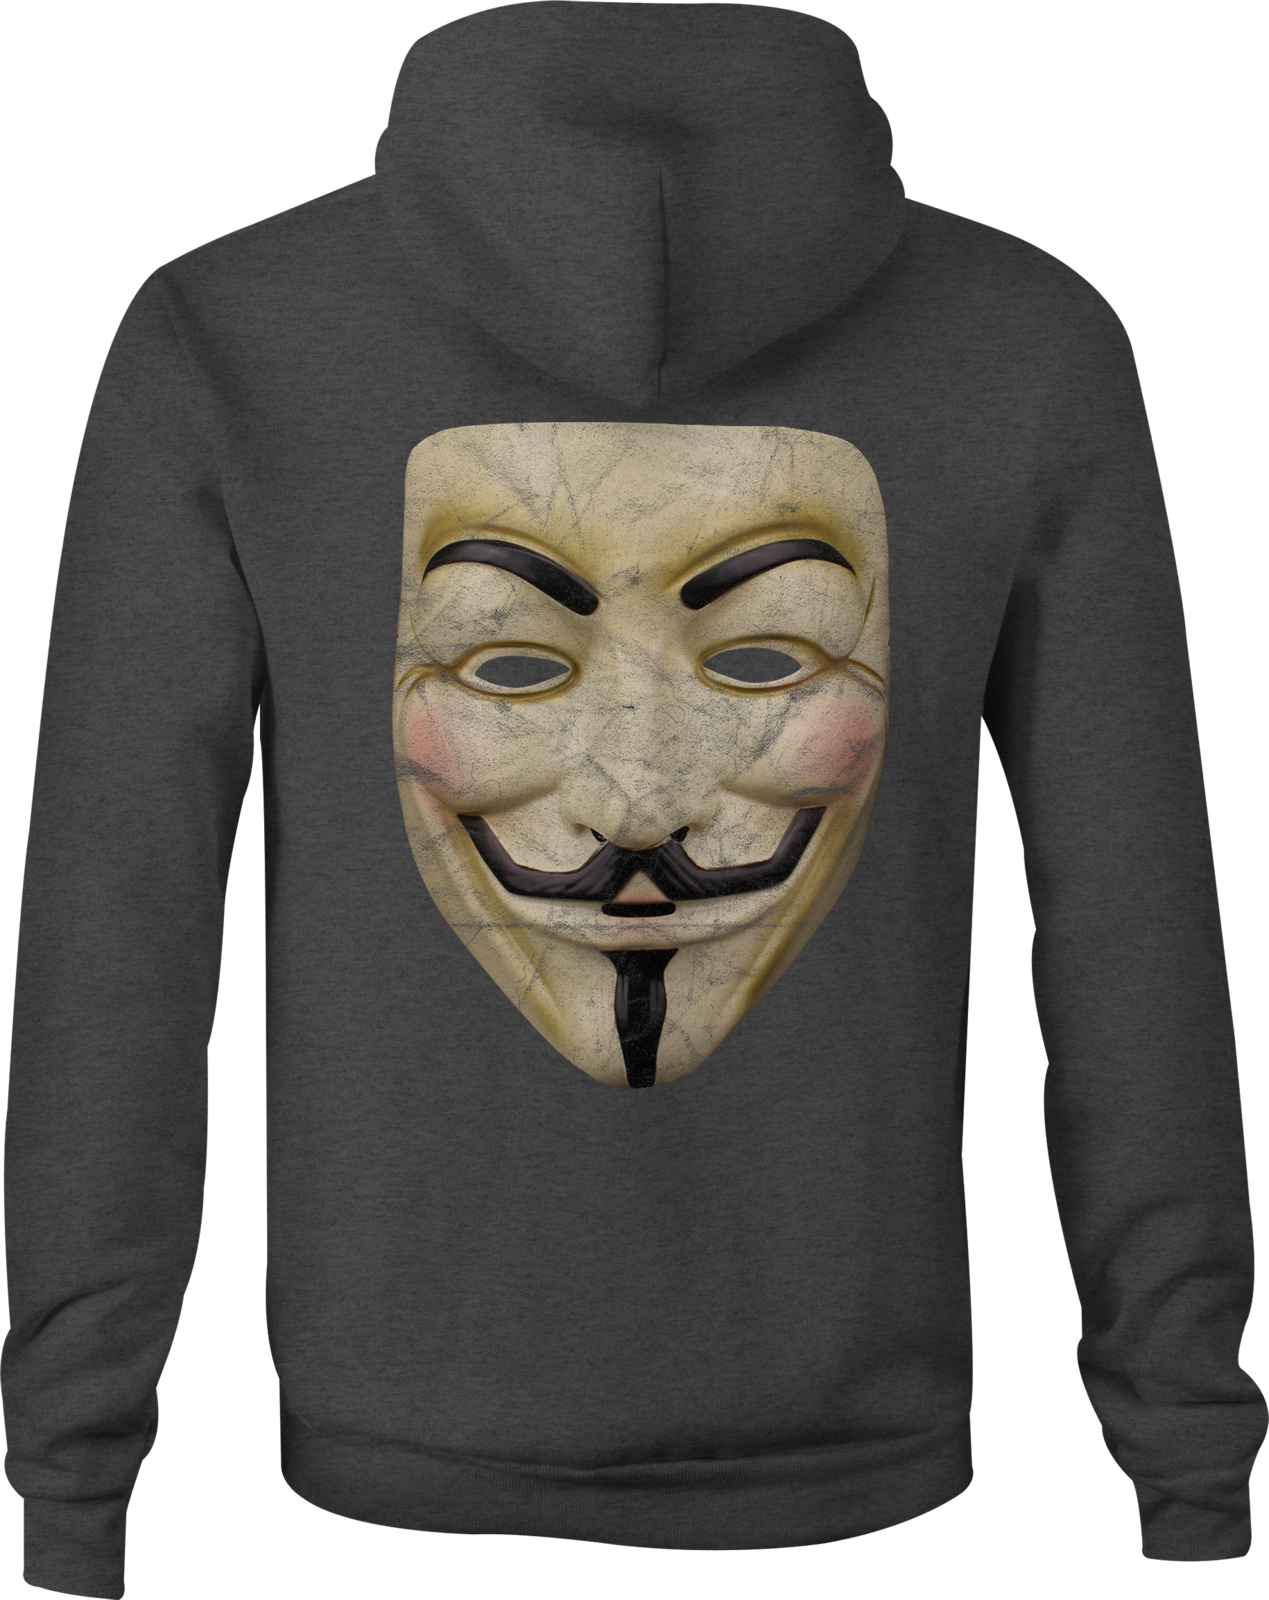 Motorcycle Zip Up Hoodie Anonymous Mask Guy Fawkes Revolution ...